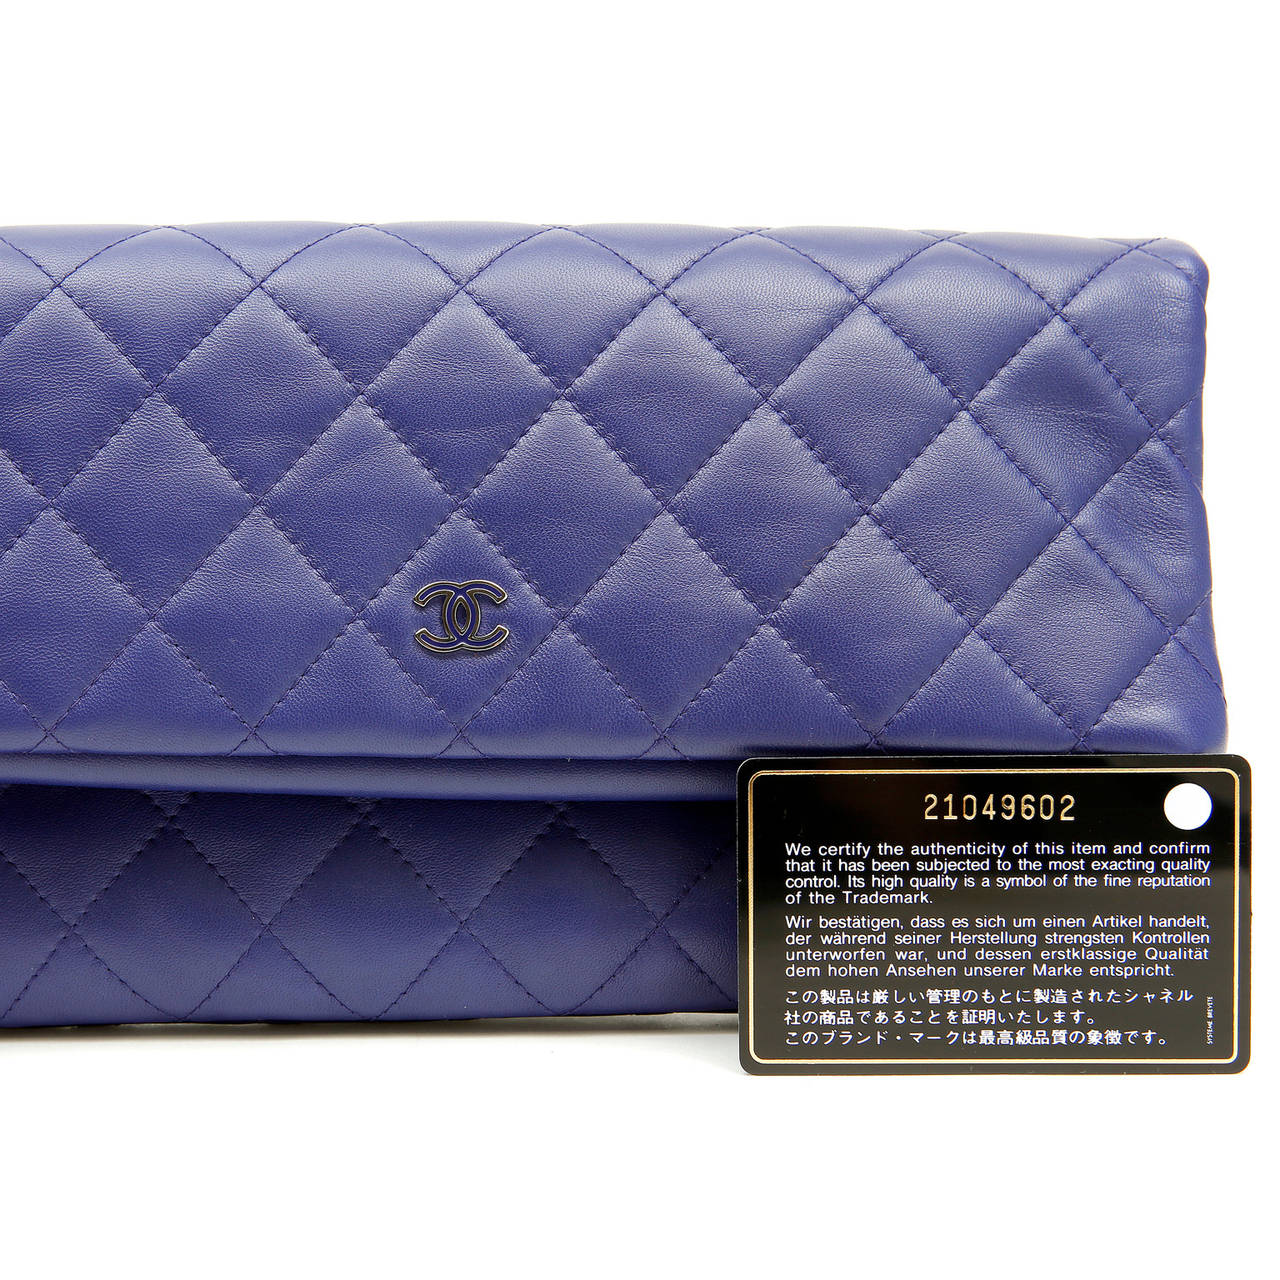 Chanel Purple Quilted Leather Clutch For Sale 6